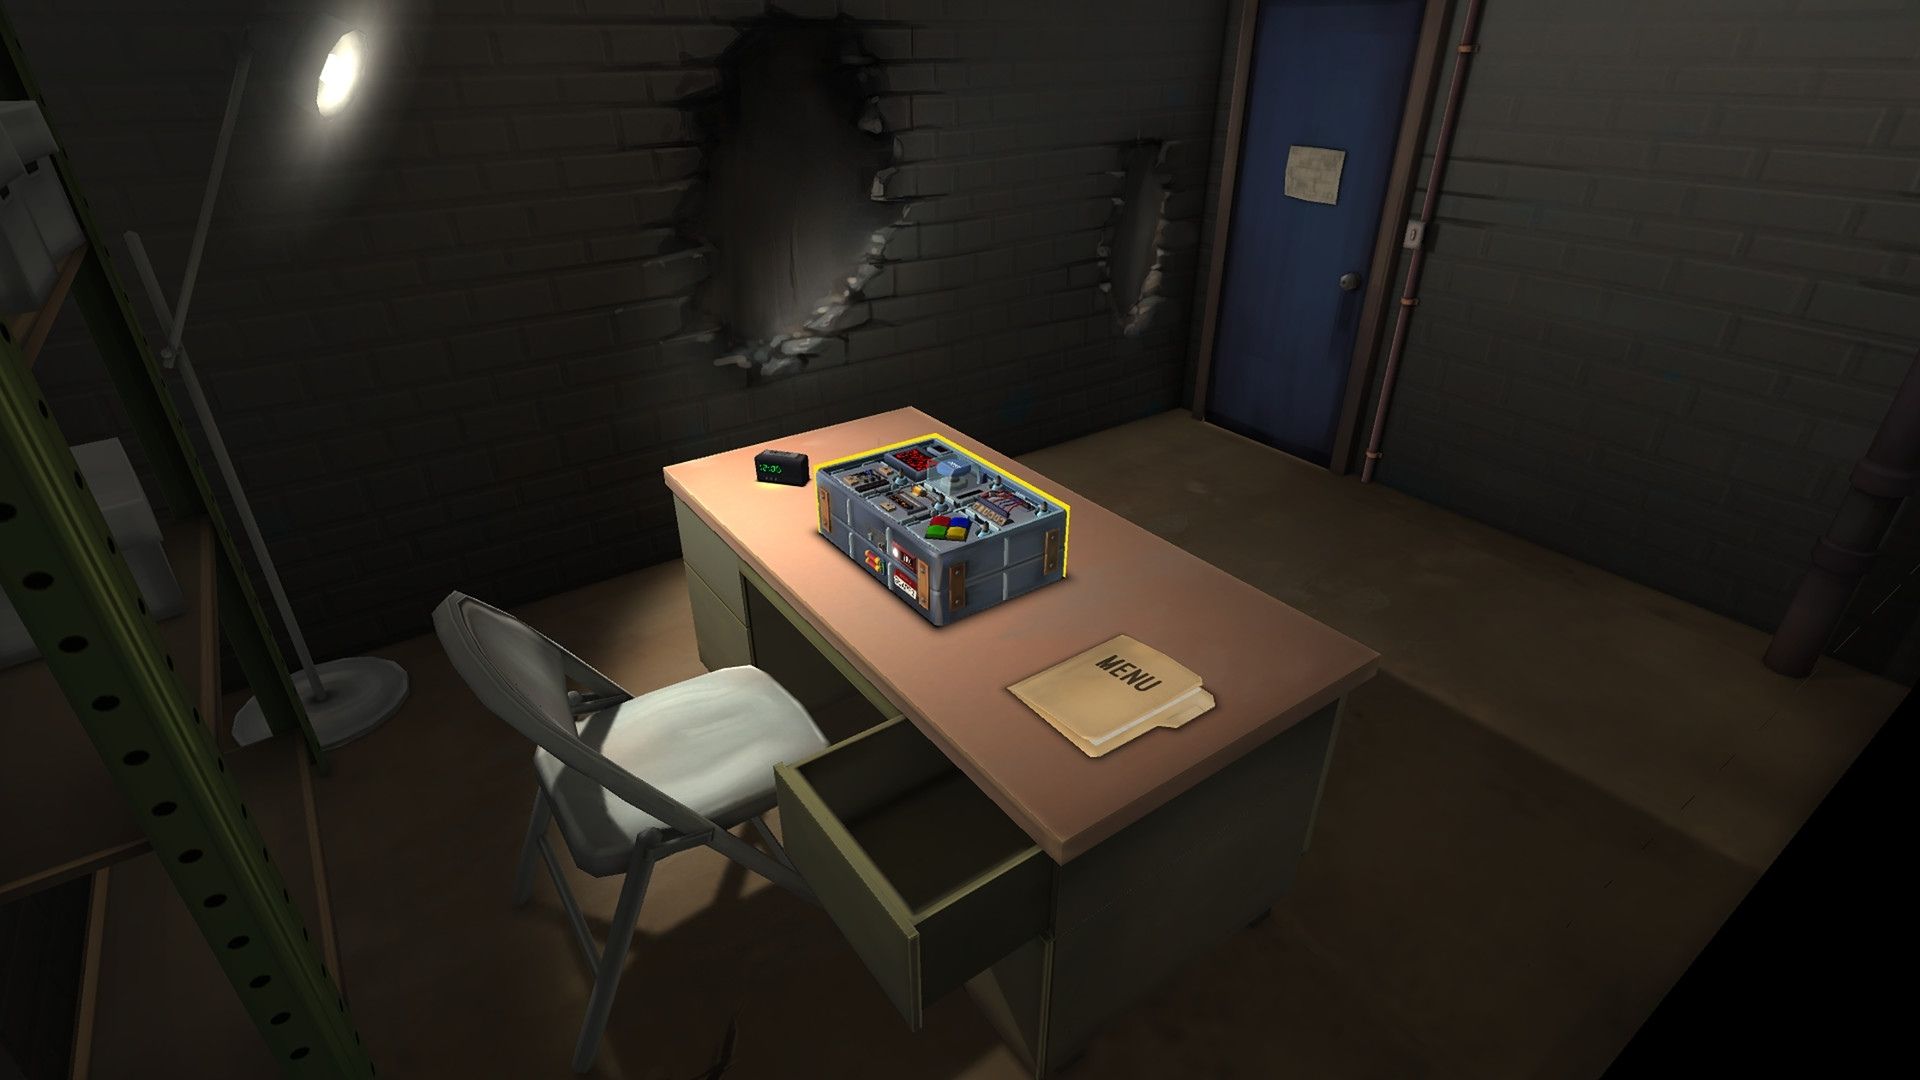 A screenshot from Keep Taking and Nobody Explodes, showing a desk, chair, and a bomb on the desk.